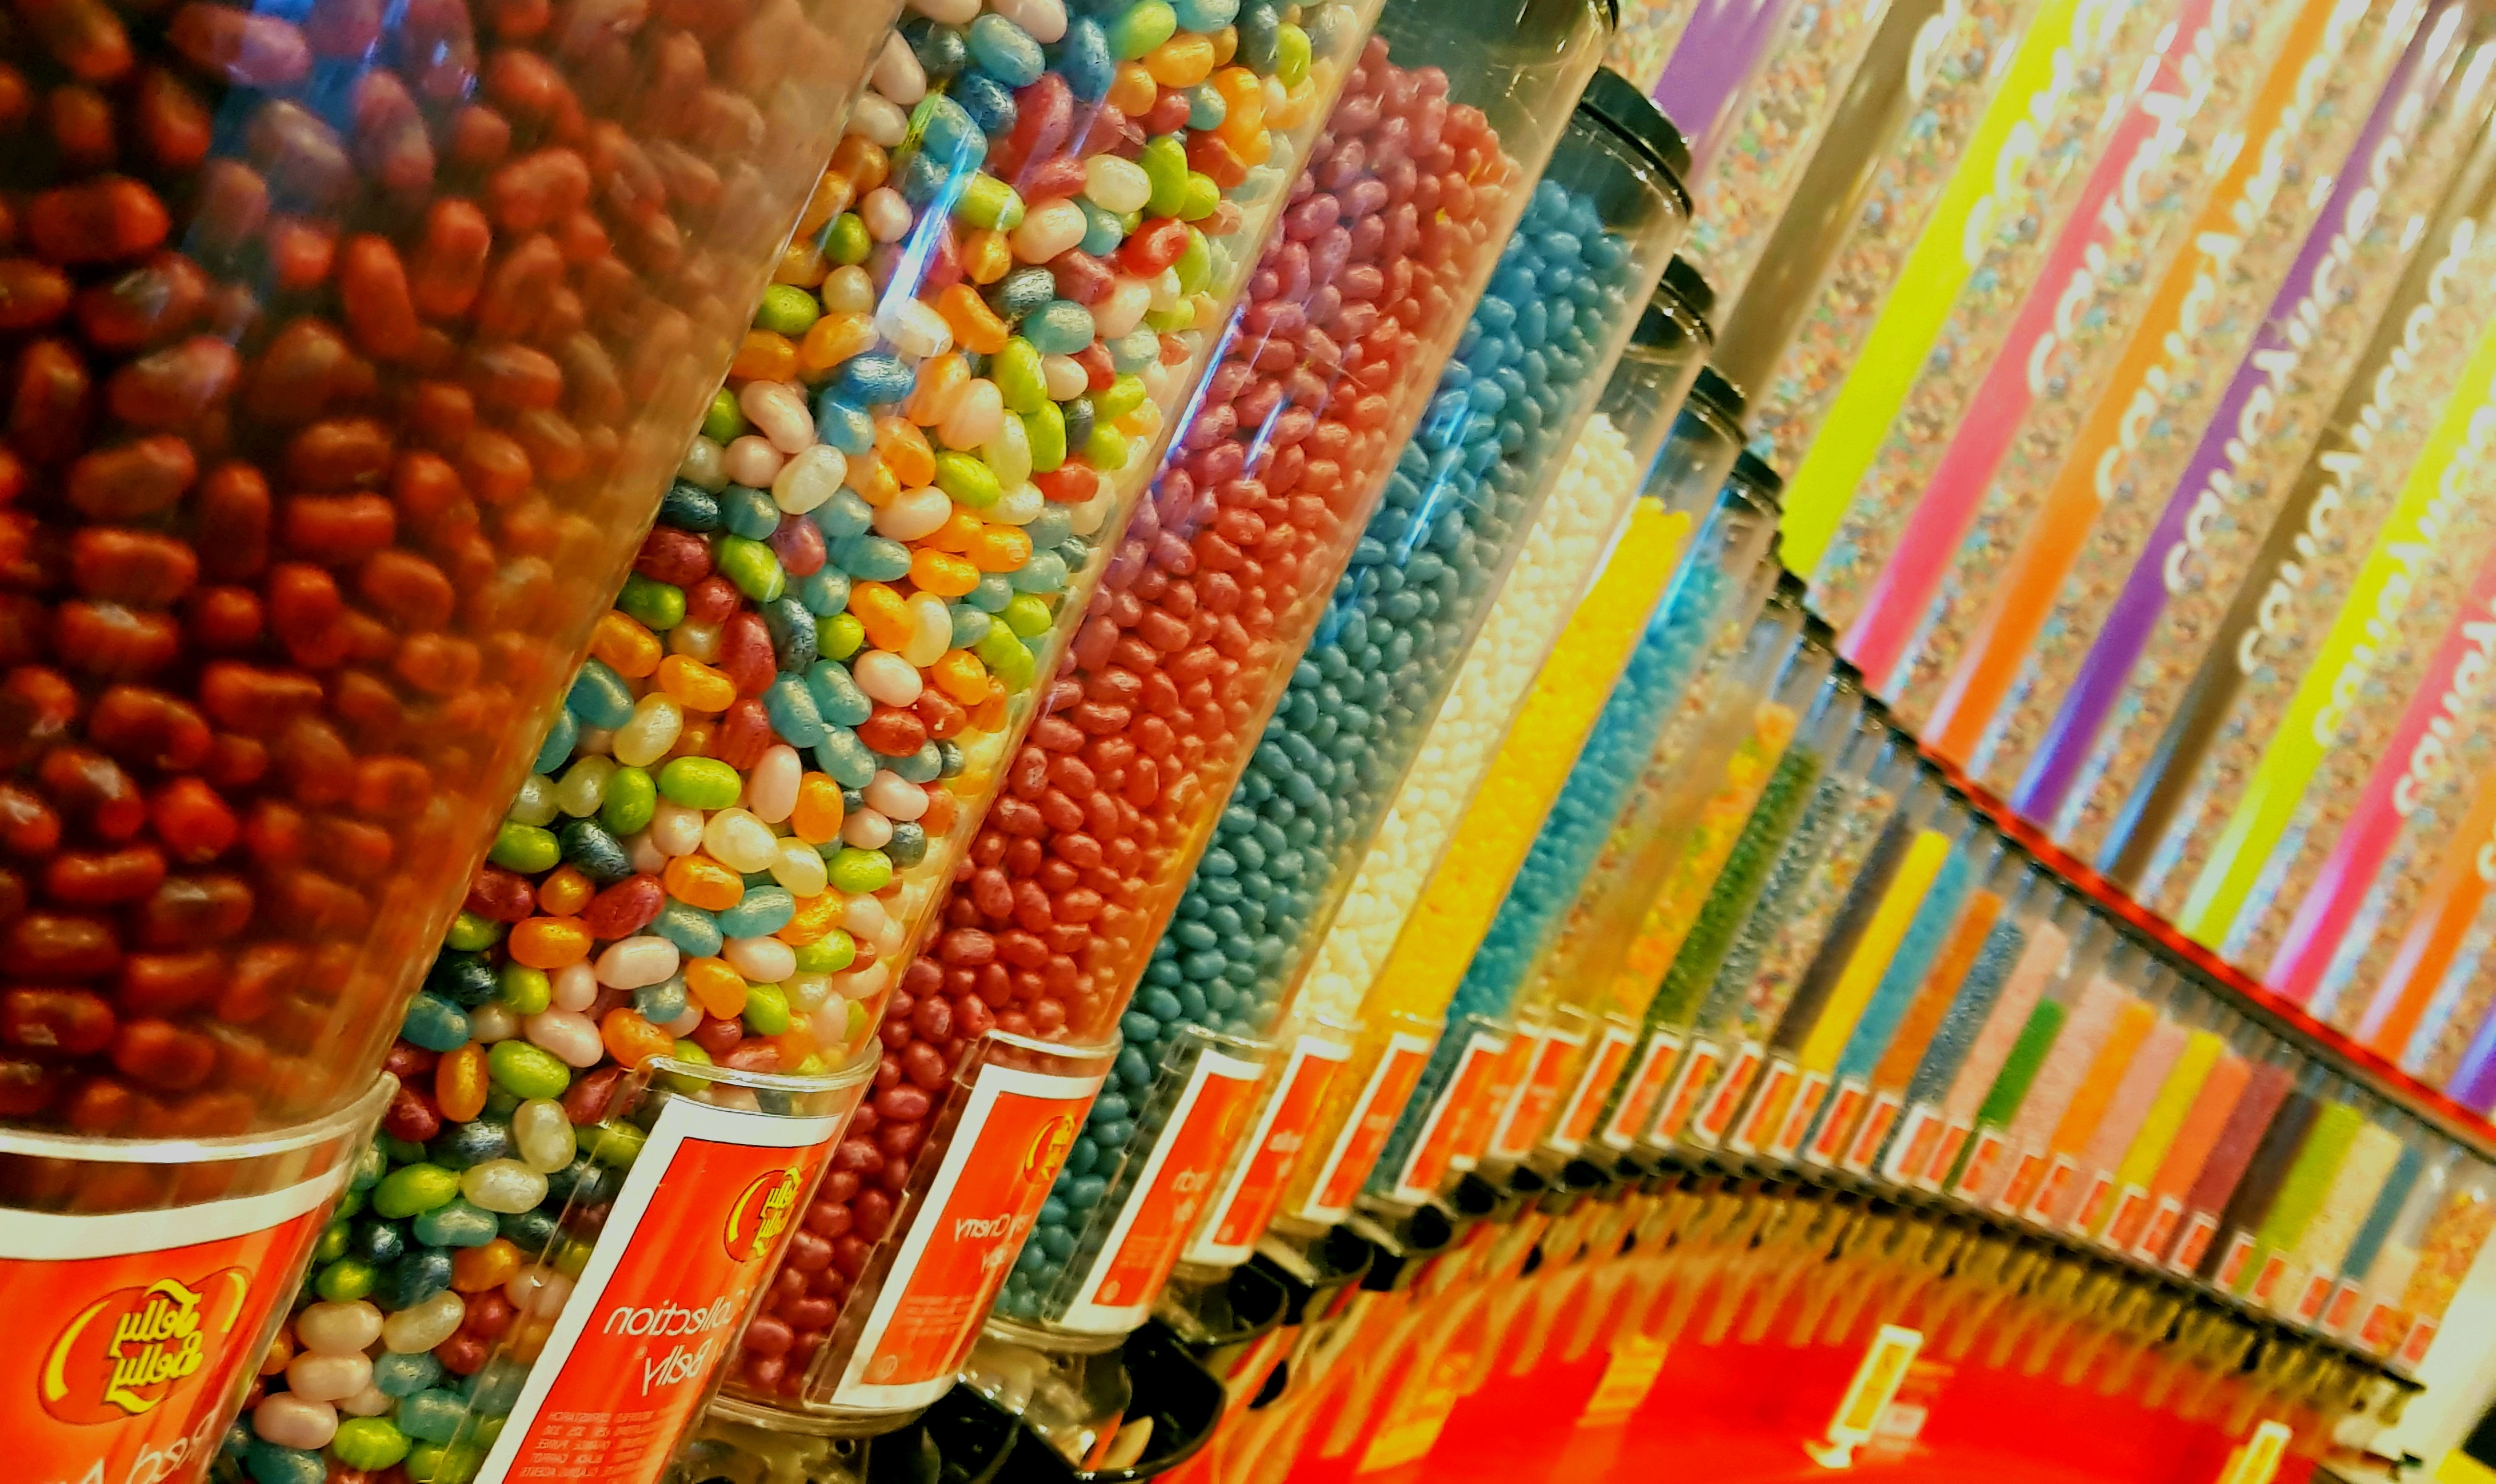 Enjoy Candy & Confections in Chicago